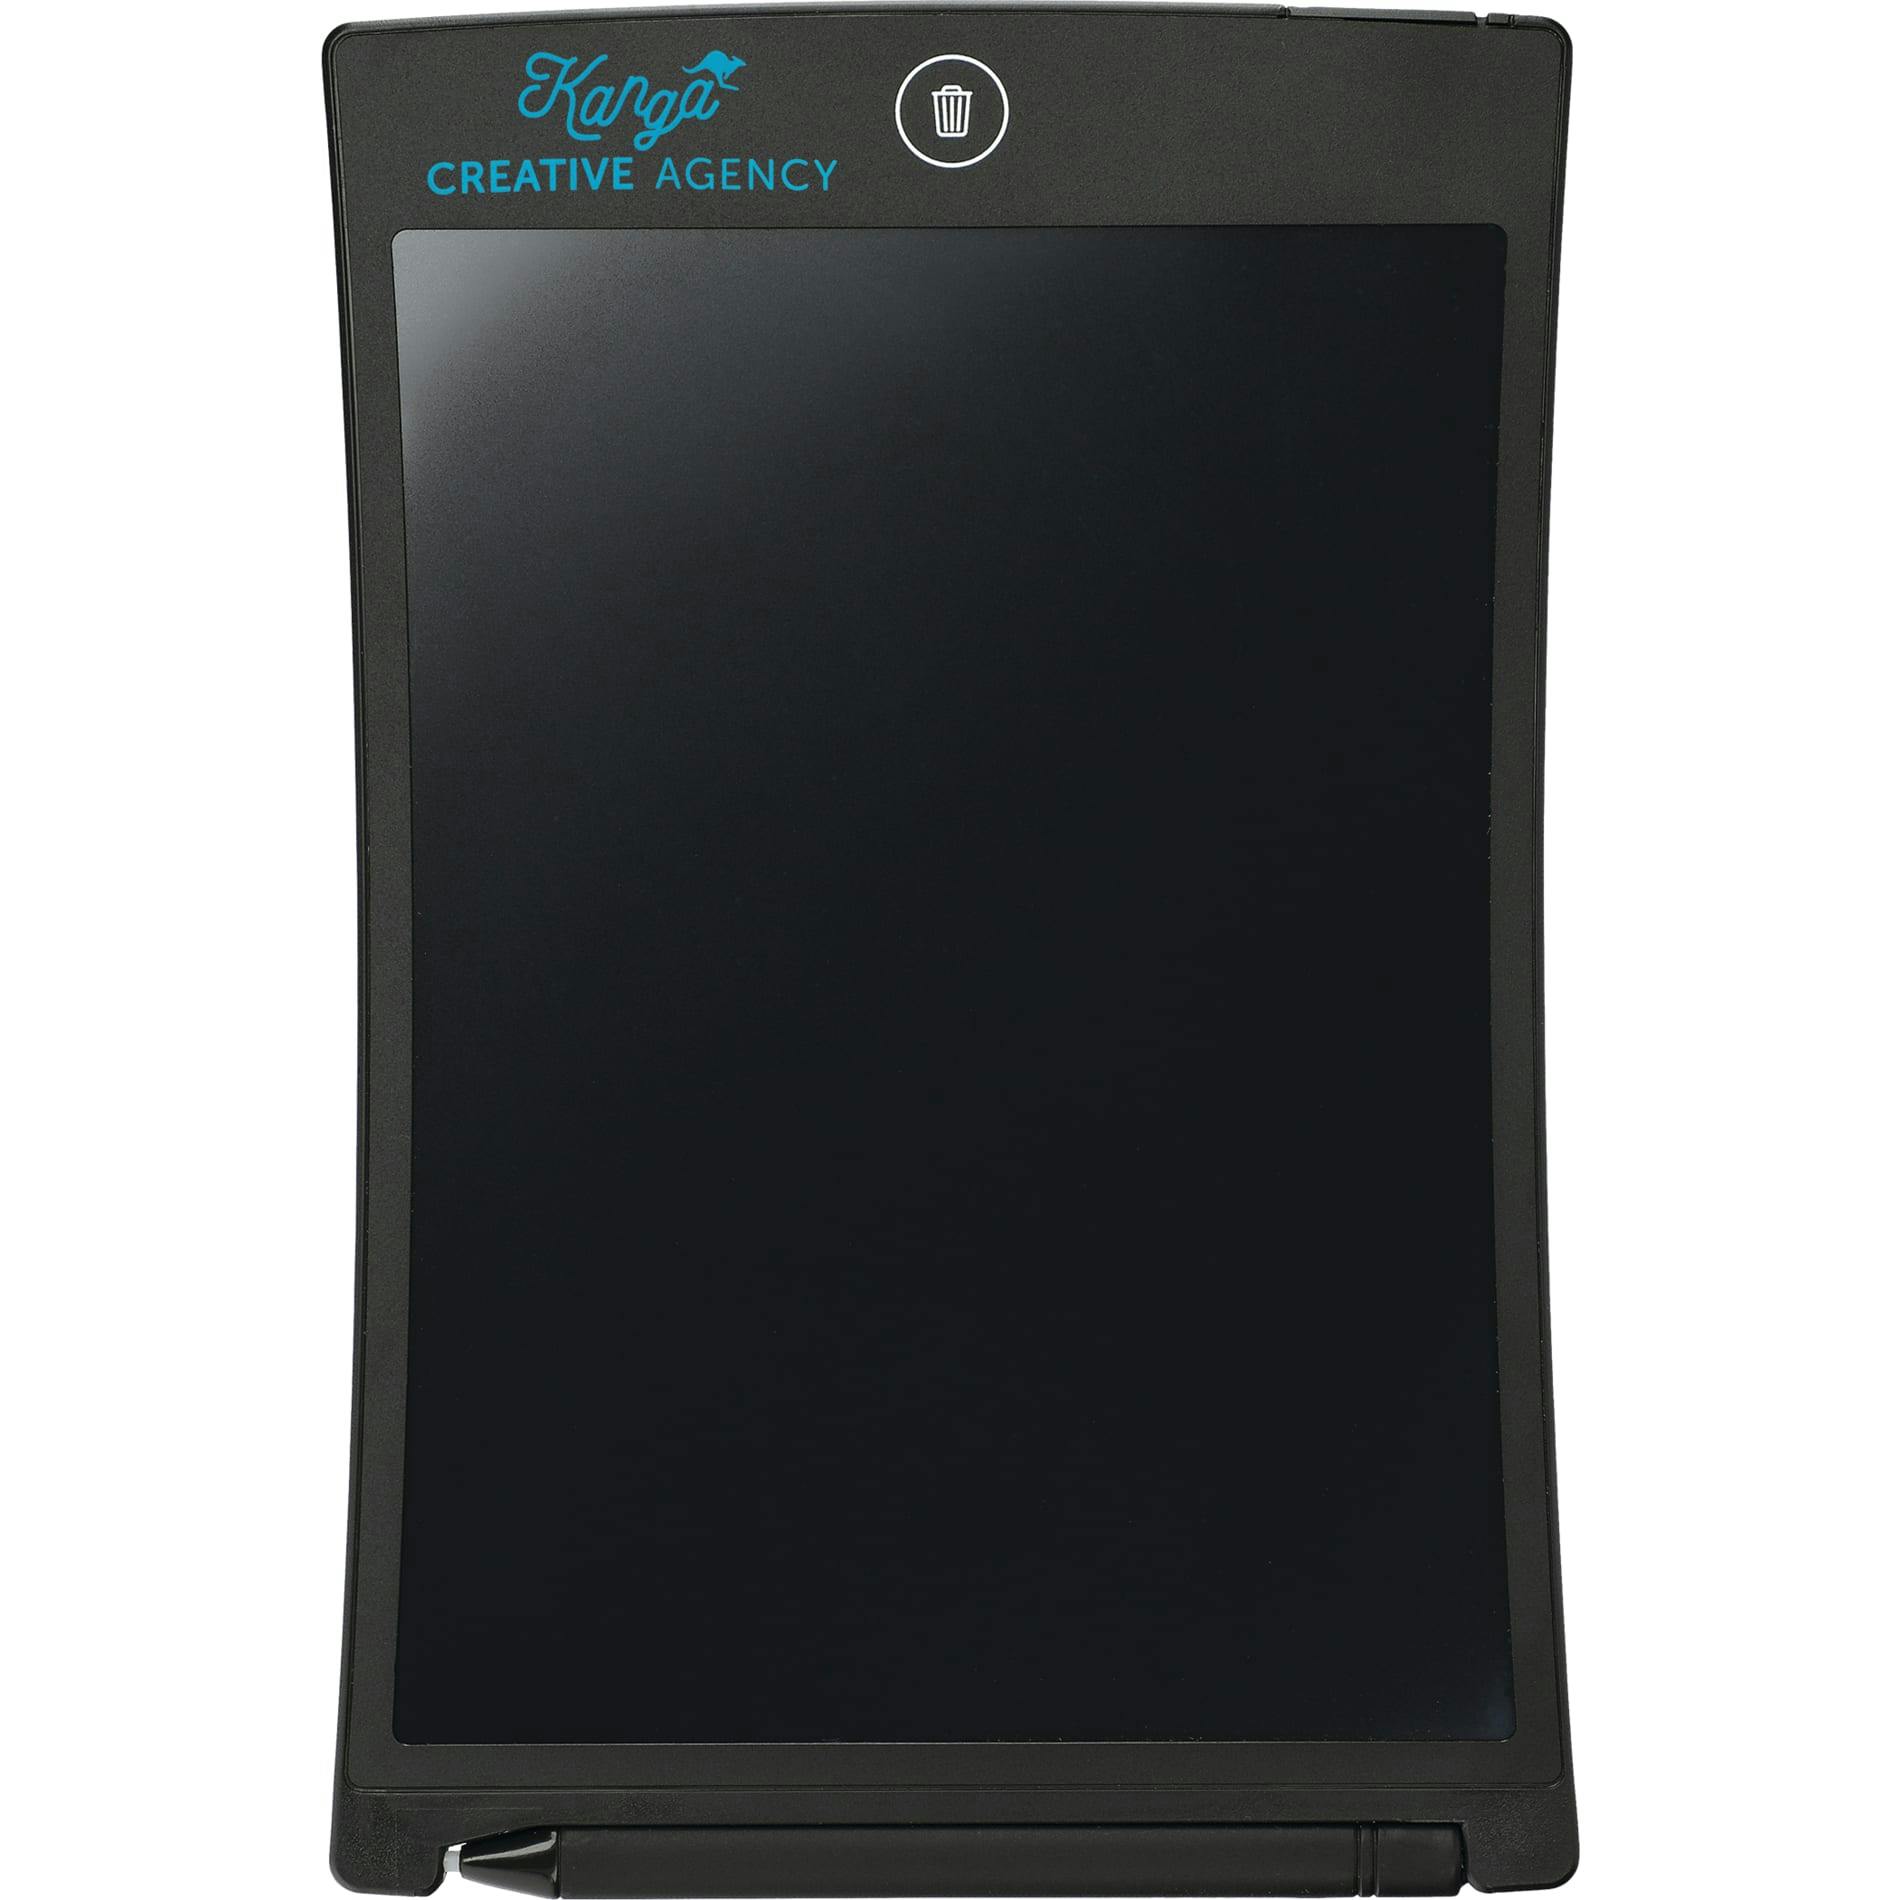 8.5" LCD e-Writing & Drawing Tablet - additional Image 6